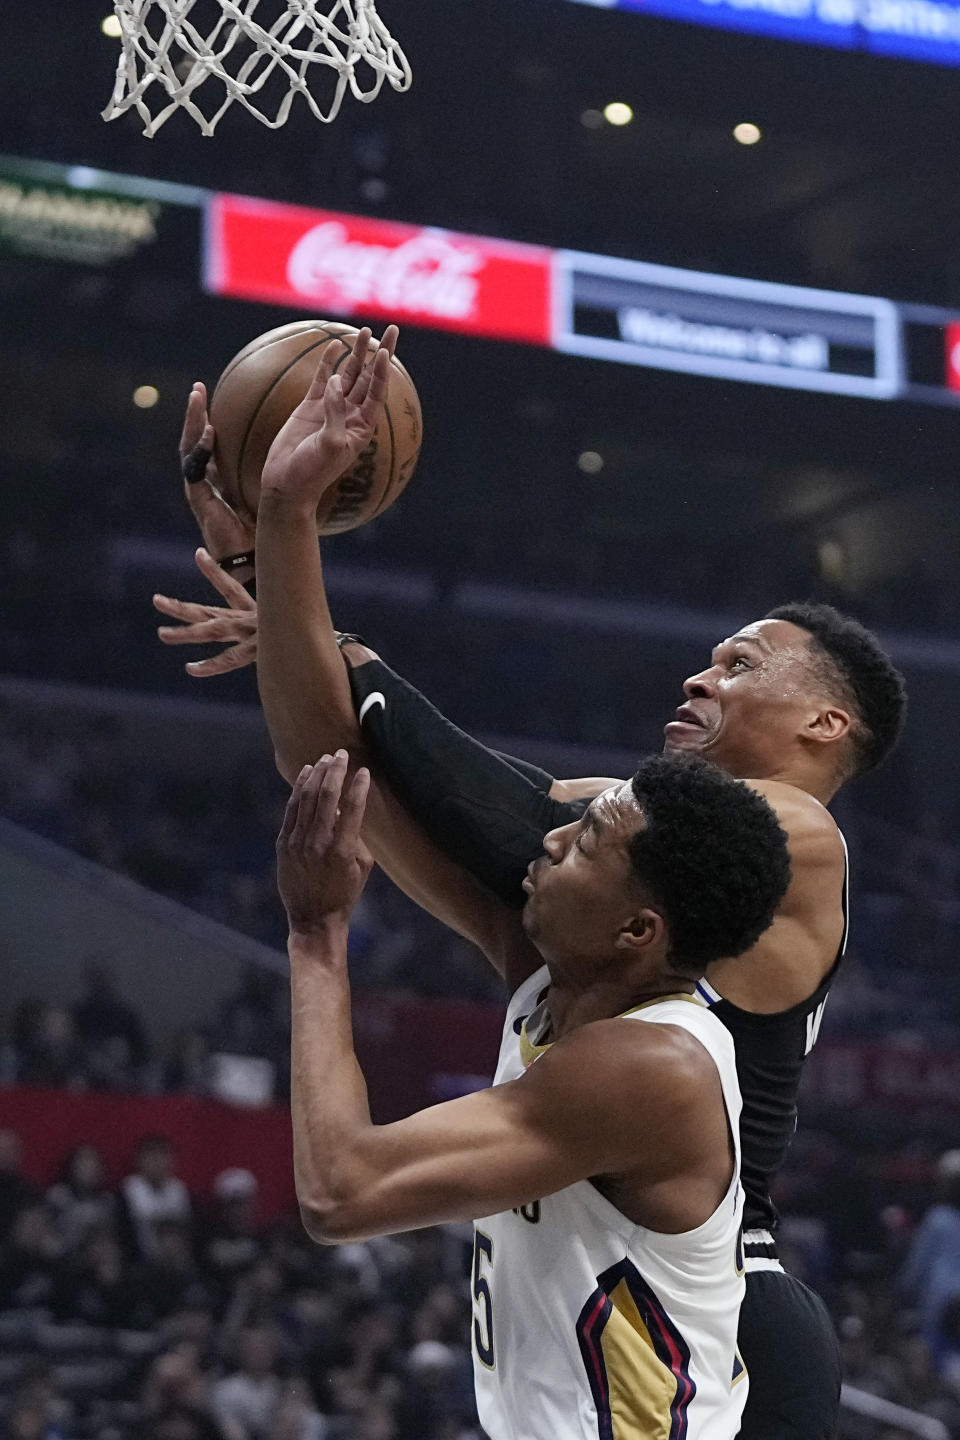 Los Angeles Clippers guard Russell Westbrook, top, shoots as New Orleans Pelicans guard Trey Murphy III defends during the first half of an NBA basketball game Saturday, March 25, 2023, in Los Angeles. (AP Photo/Mark J. Terrill)